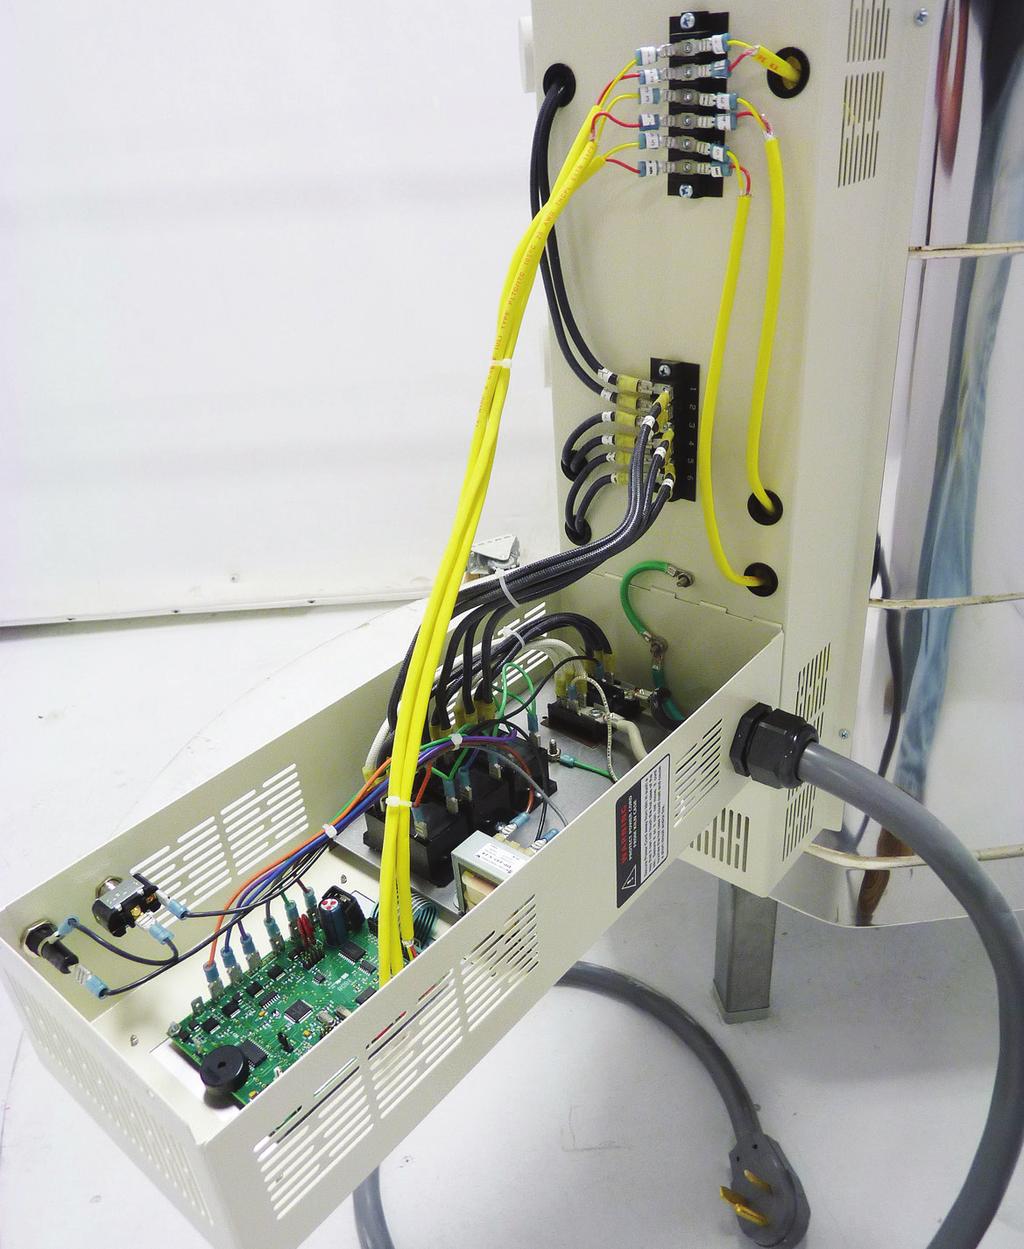 Photo of a 1-phase control panel for a three section Easy-Fire kiln L-G-TRTC/EF Thermocouple Terminal Strip S-E-ECBX/03 Element Cover Box L-G-HETP/PR Power Element Lead Wires (Top Zone) L-G-BUSH/EF